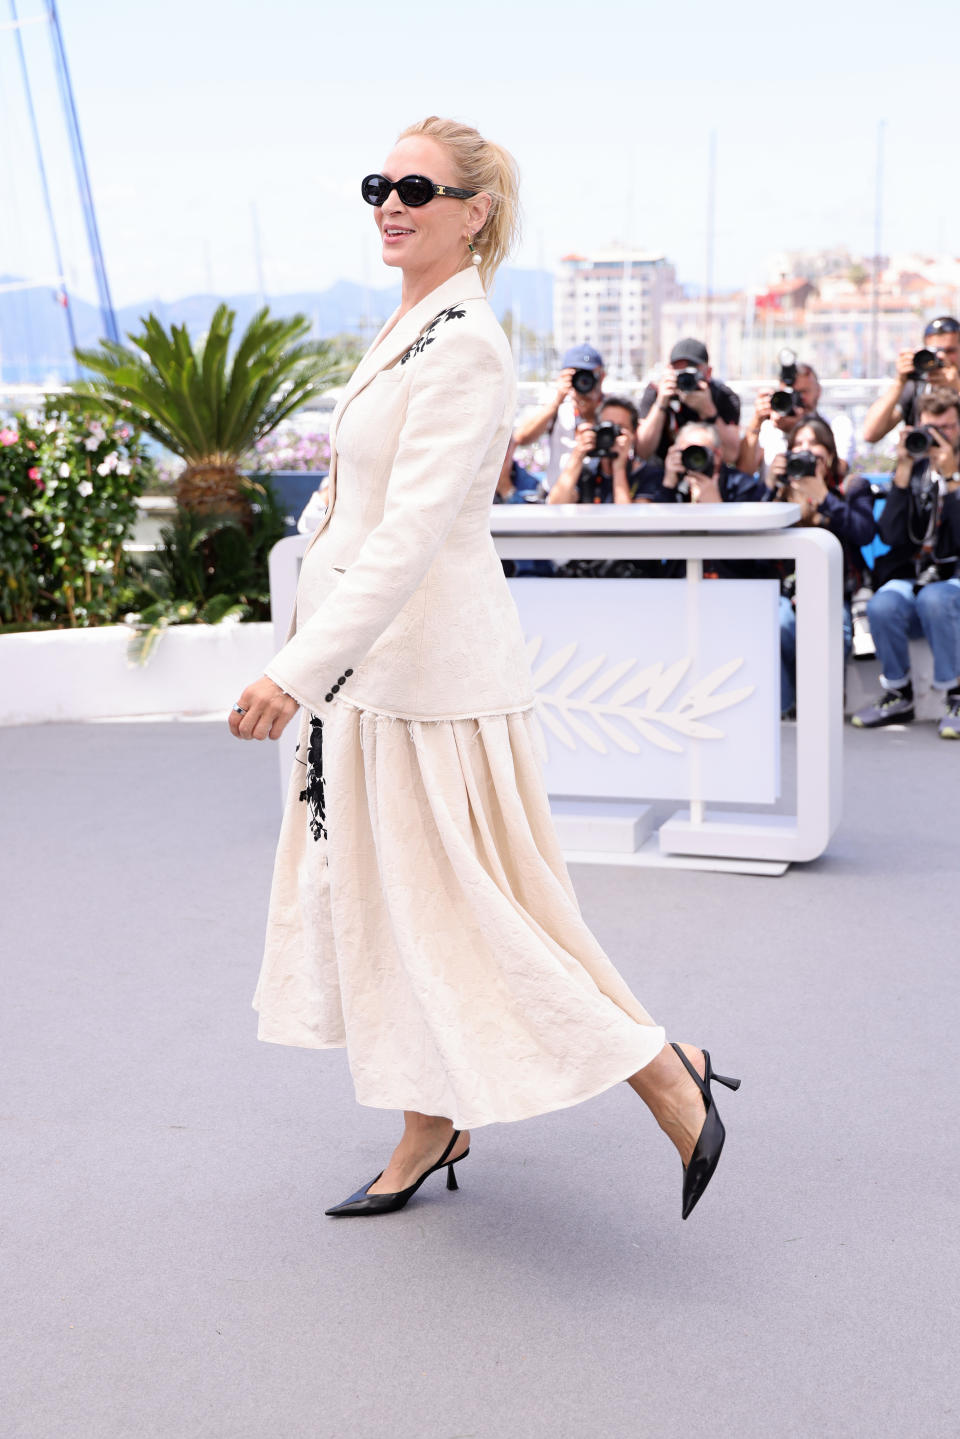 CANNES, FRANCE - MAY 18: Uma Thurman attends the "Oh, Canada" Photocall at the 77th annual Cannes Film Festival at Palais des Festivals on May 18, 2024 in Cannes, France. (Photo by Andreas Rentz/Getty Images)